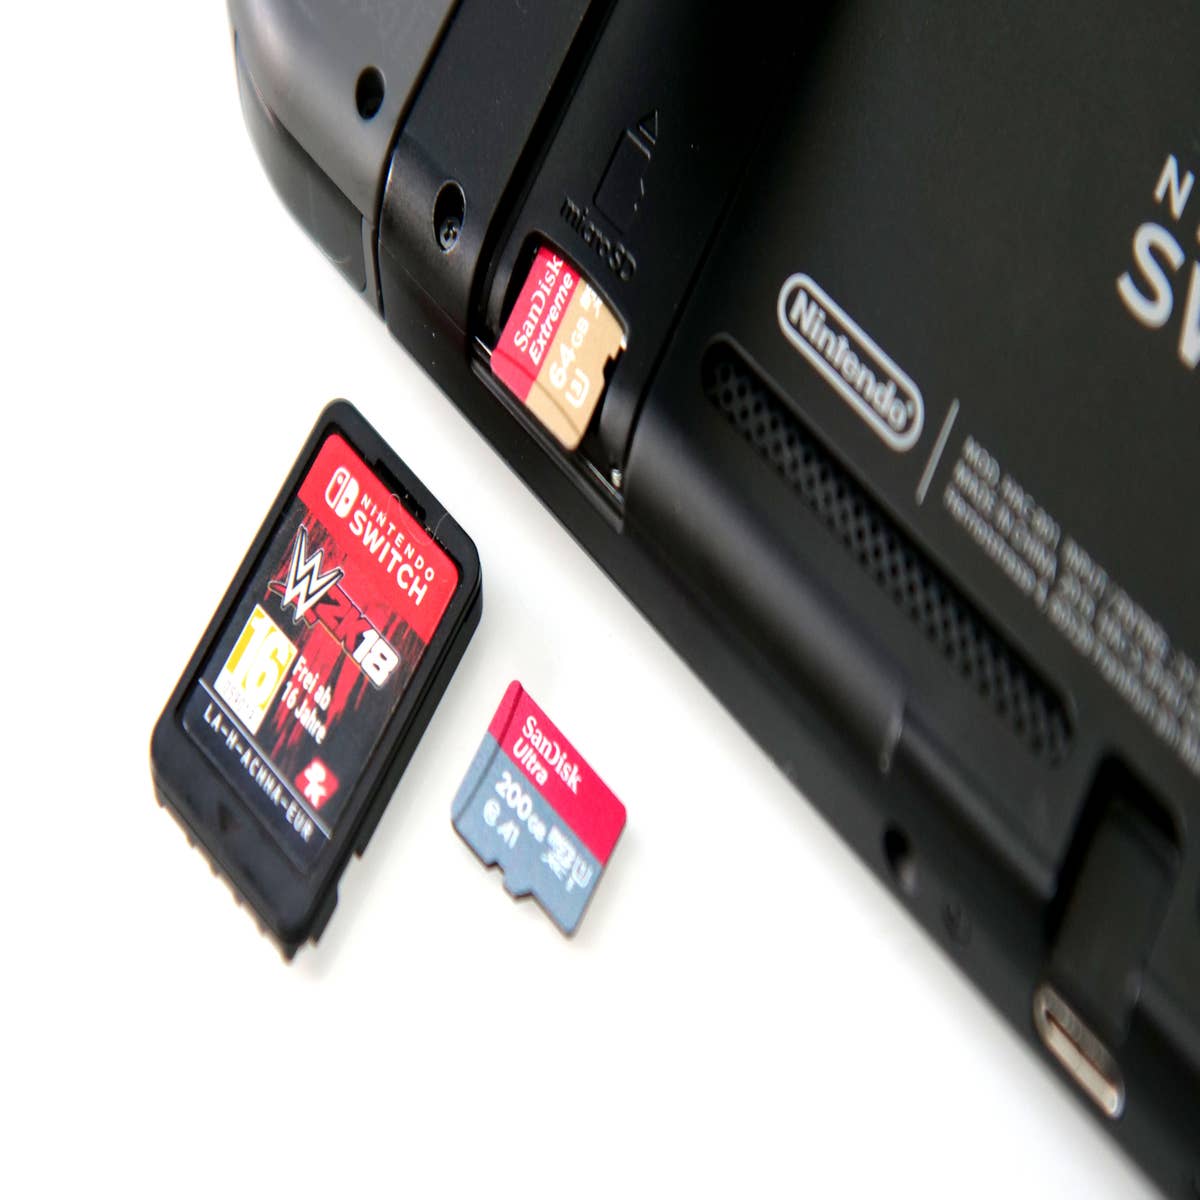 The best Micro SD cards for Nintendo Switch 2024